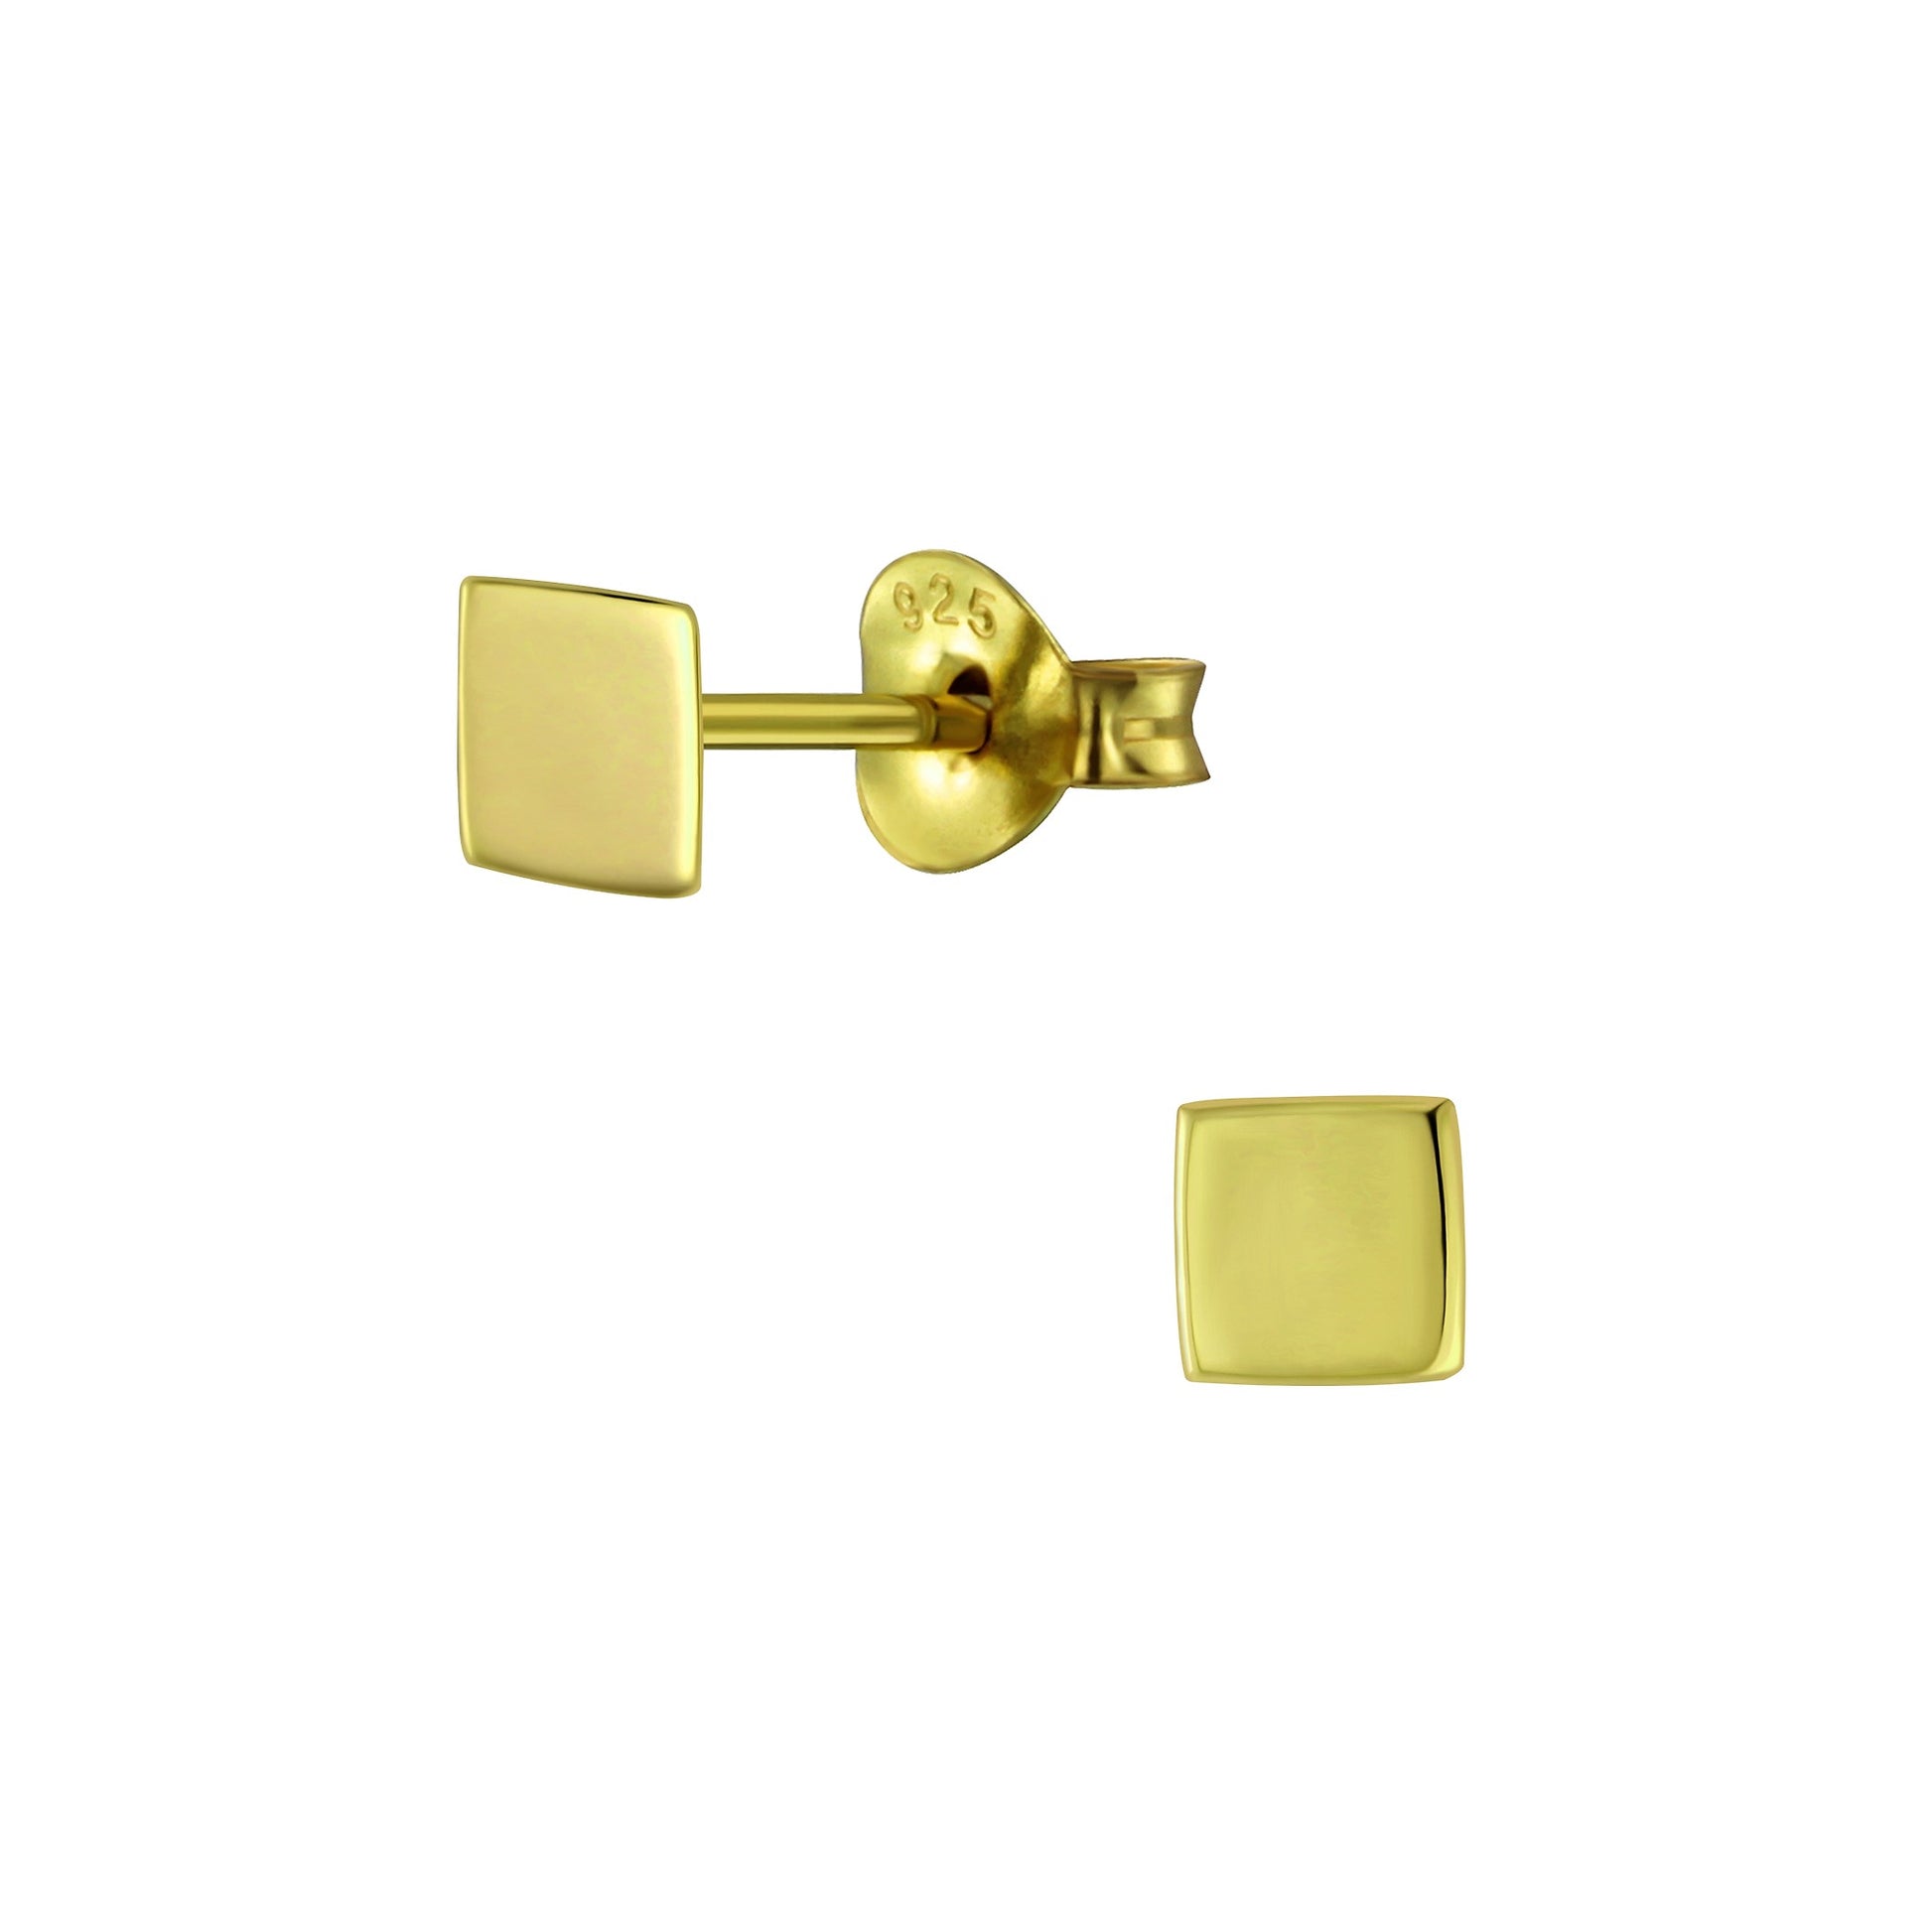 Sterling Silver Square Stud Earrings in Gold NZ